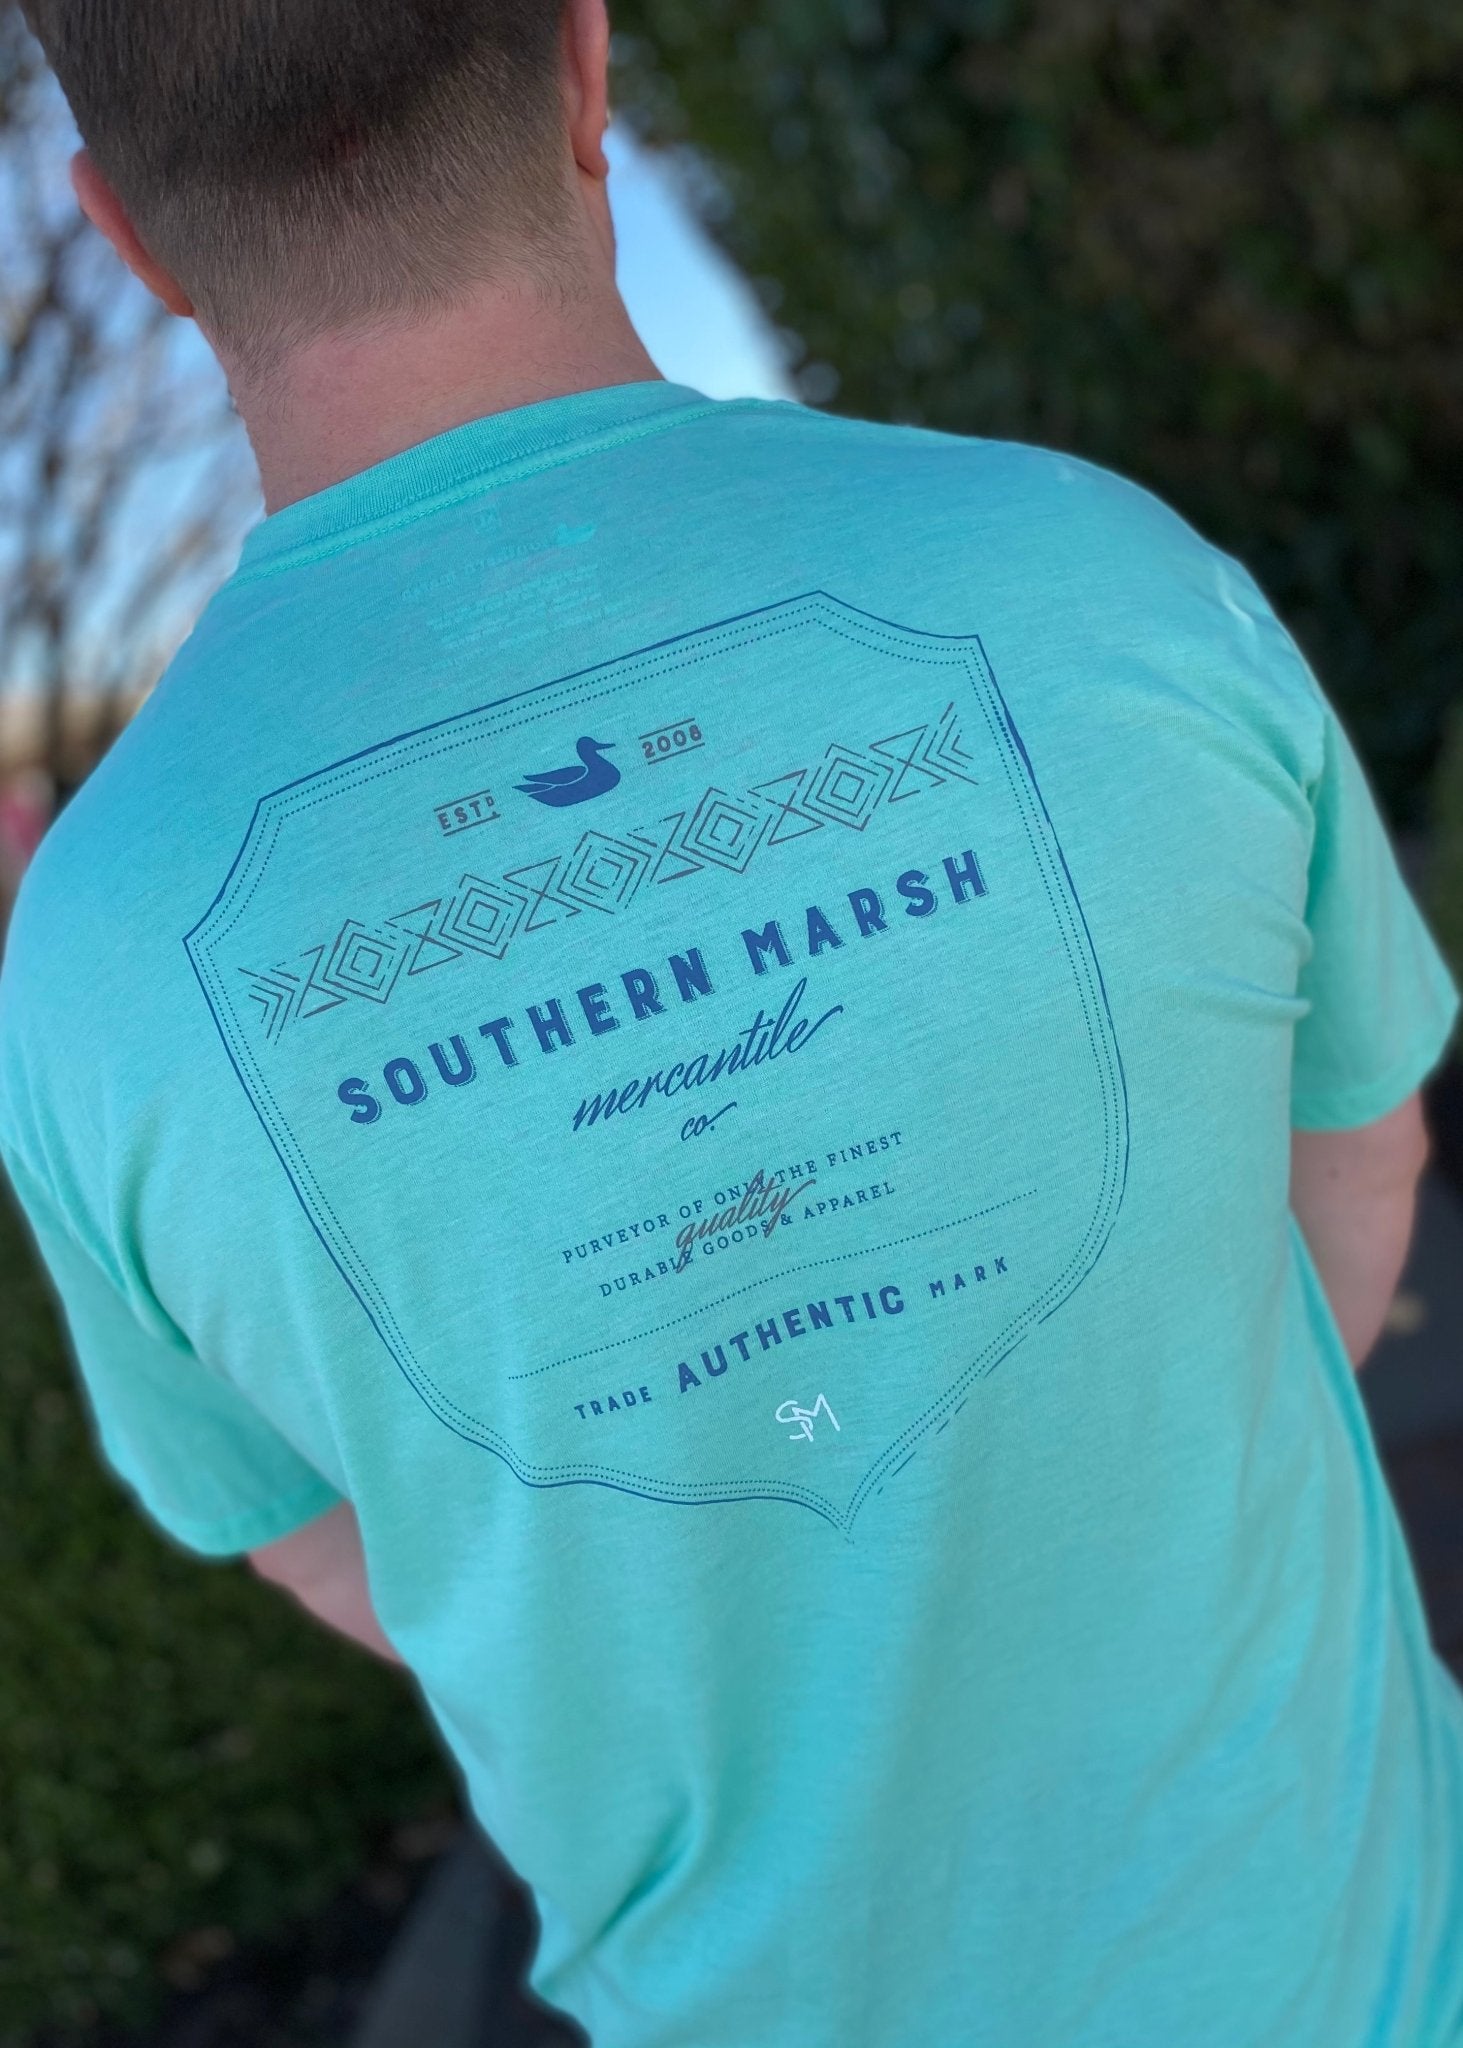 Southern Marsh Seawash Tee - Mercantile Co - Bimini Green - Graphic Tee -Jimberly's Boutique-Olive Branch-Mississippi